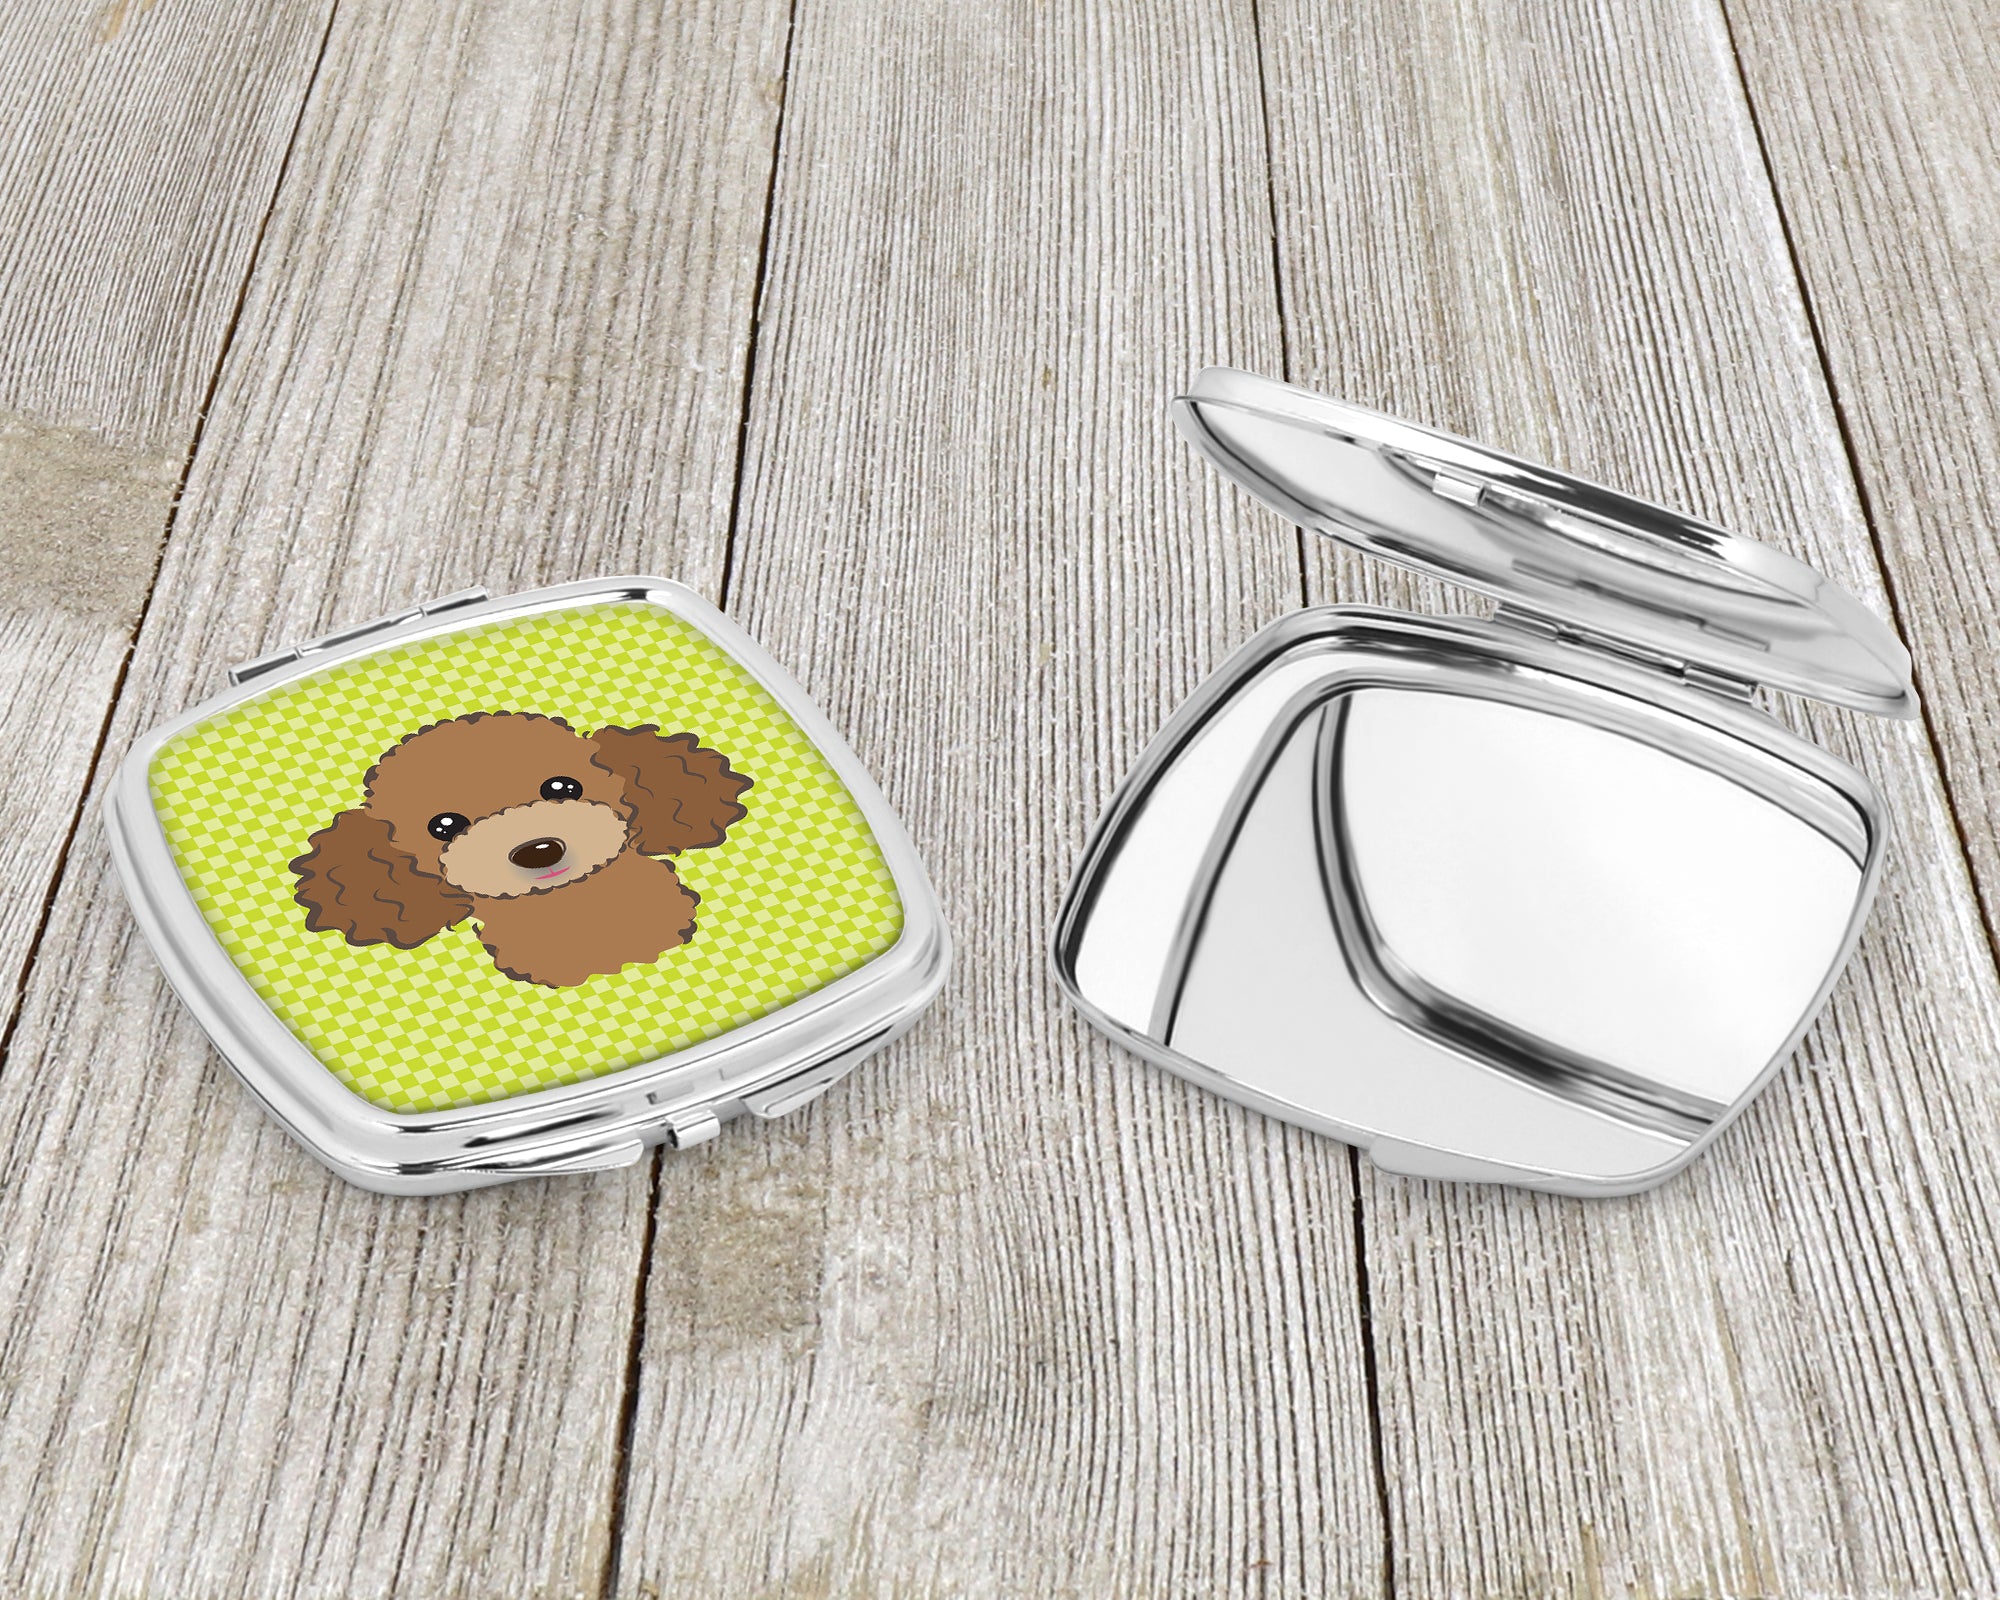 Checkerboard Lime Green Chocolate Brown Poodle Compact Mirror BB1318SCM